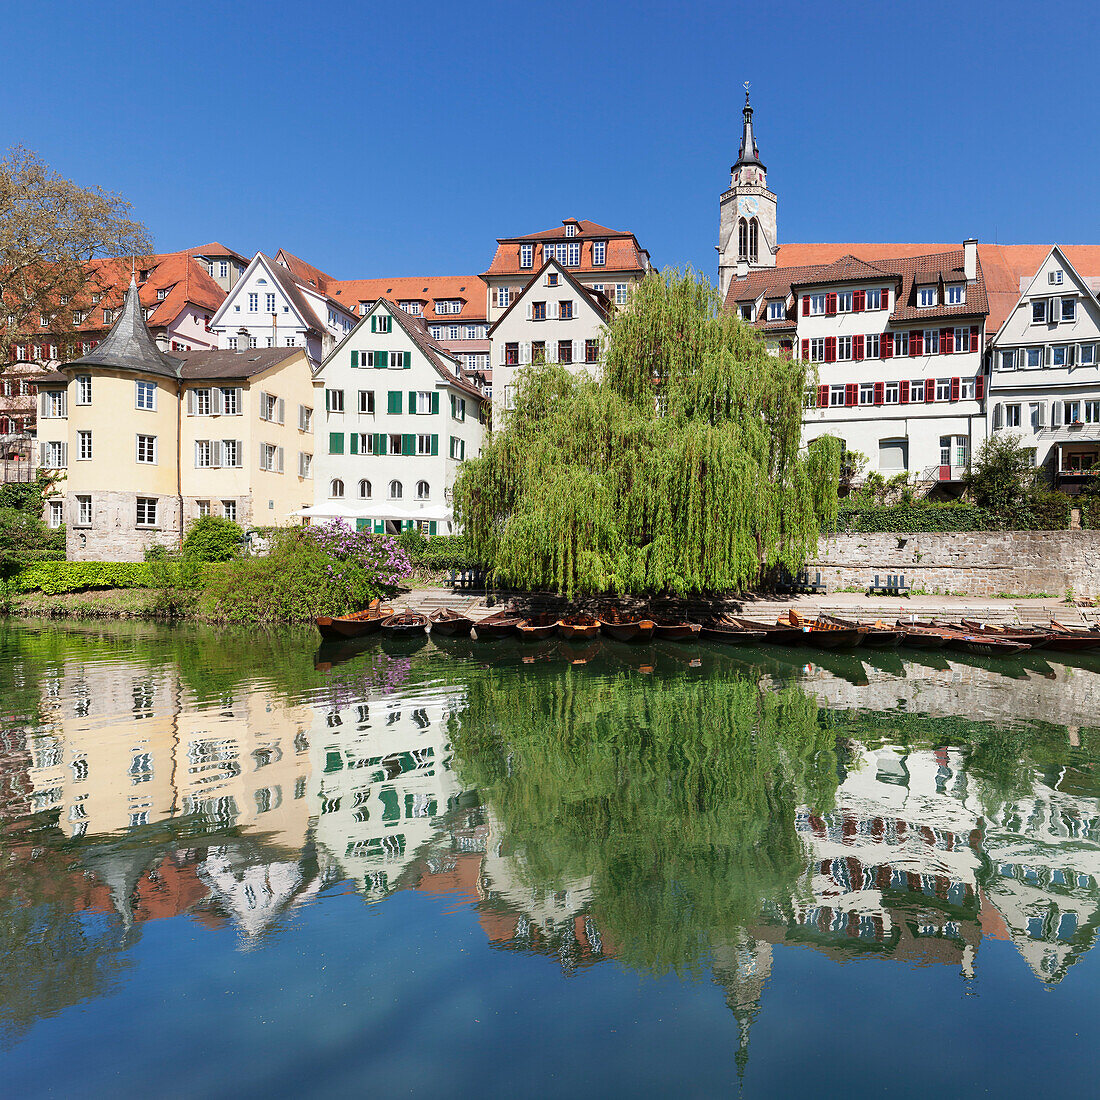 Old town with Hoelderlinturm tower and Stiftskirche Church reflecting in the Neckar River, Tuebingen, Baden-Wurttemberg, Germany, Europe